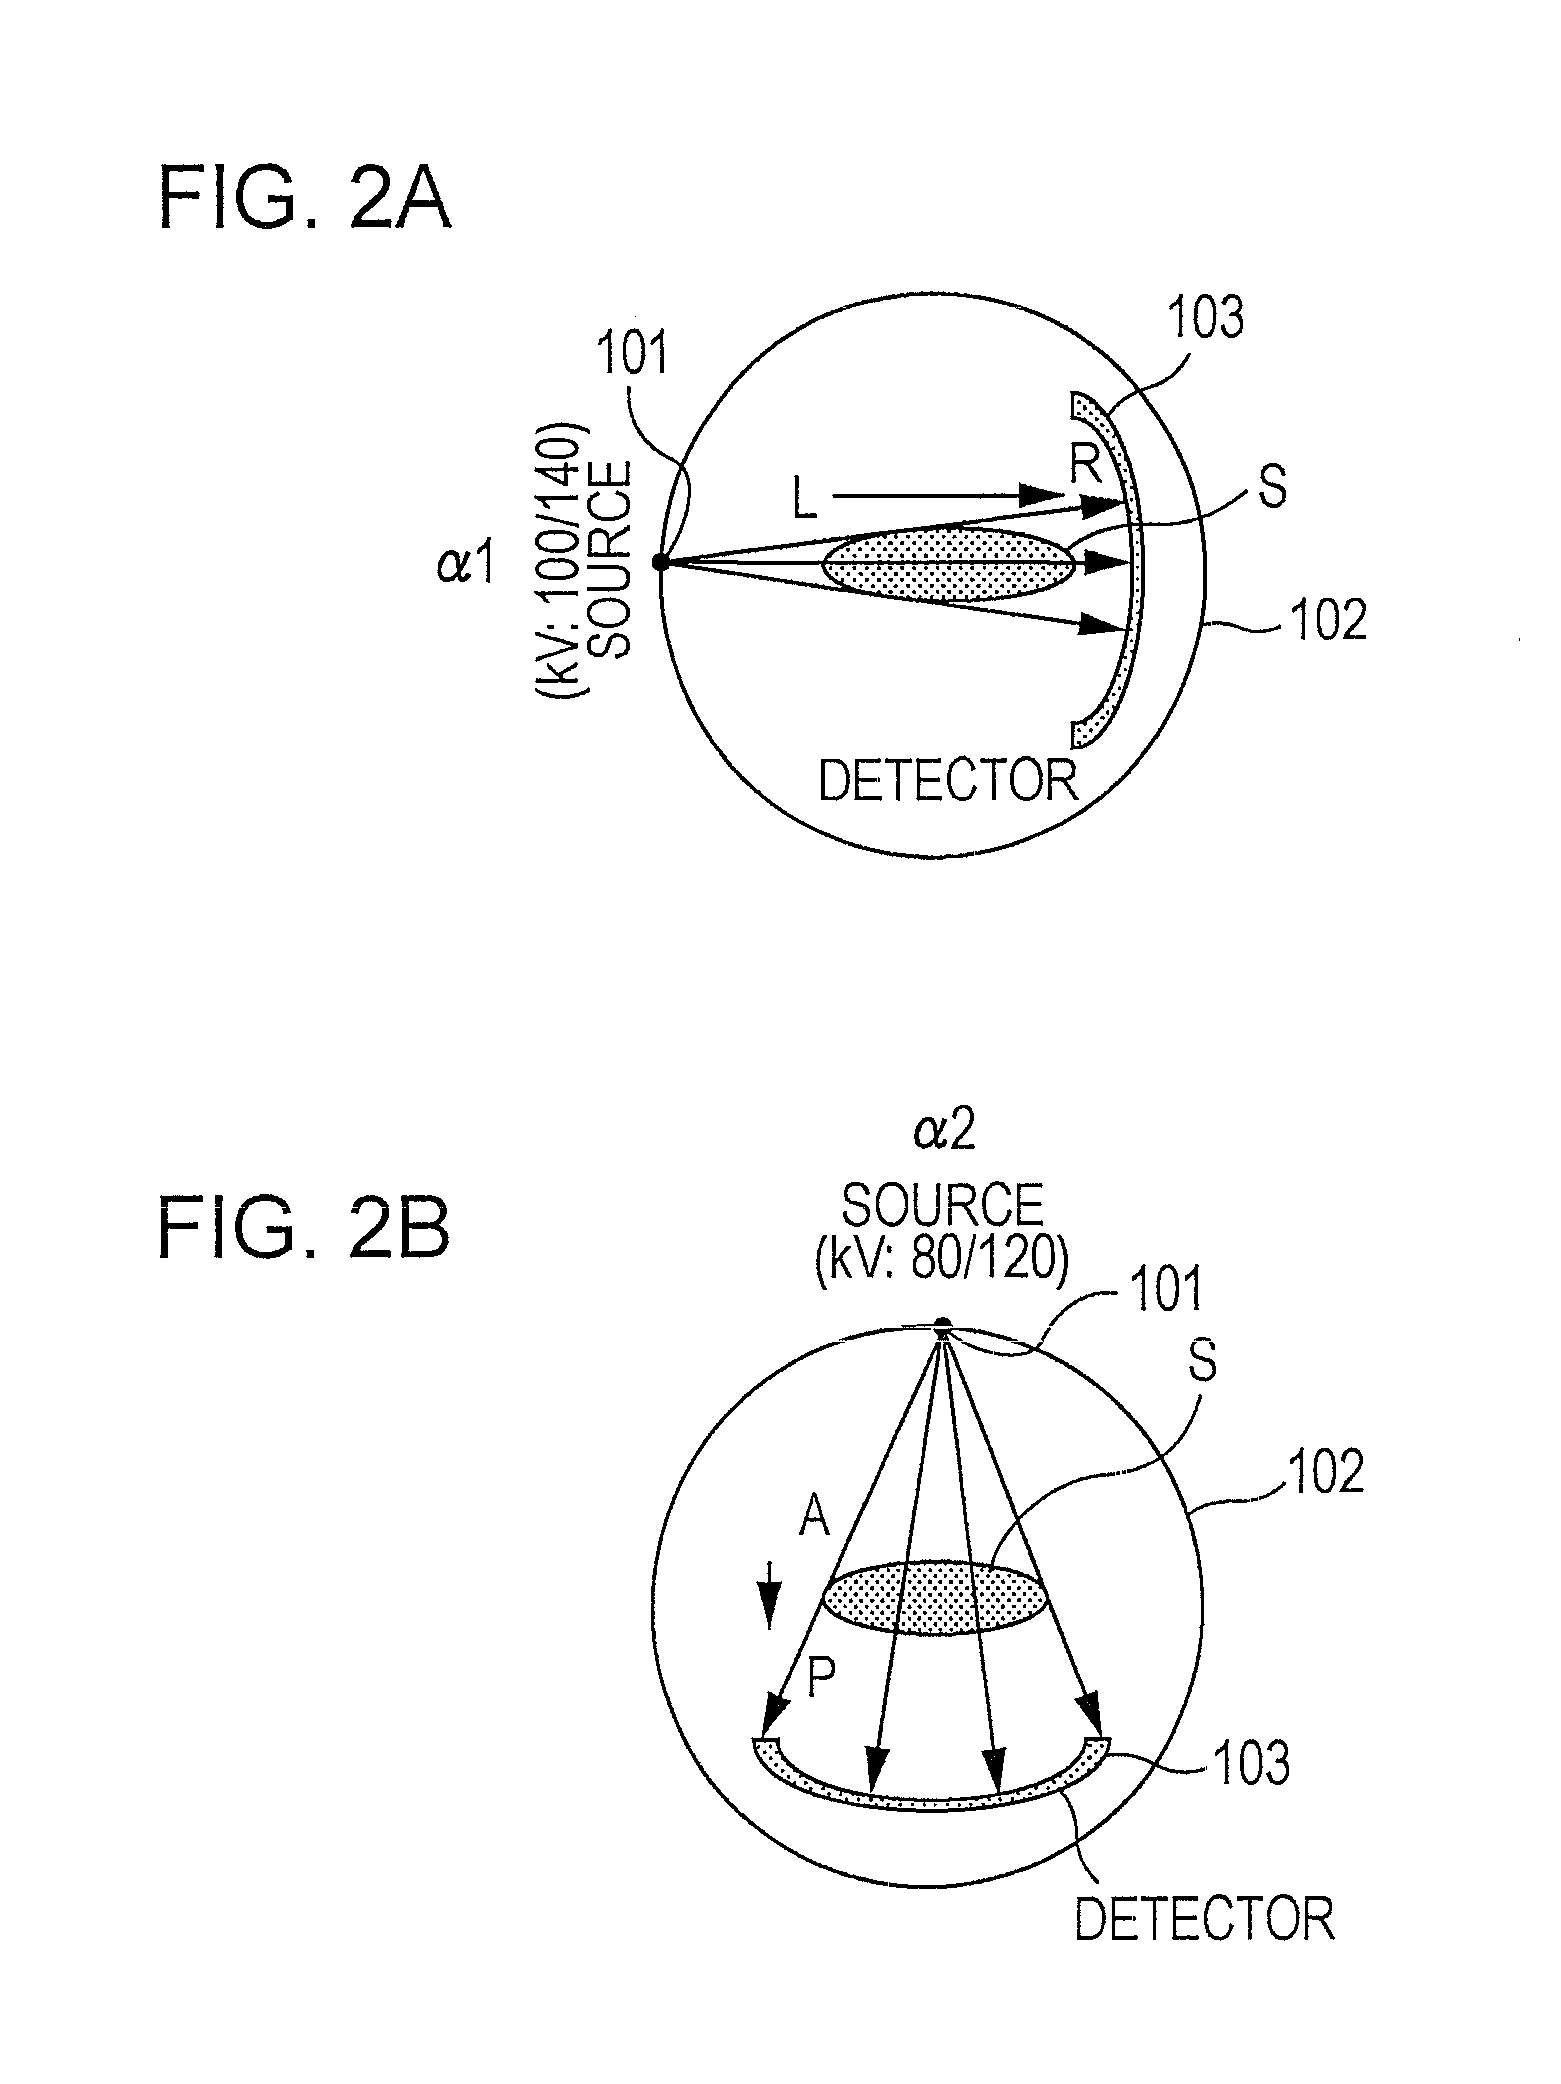 Voltage modulation in dual energy computed tomography